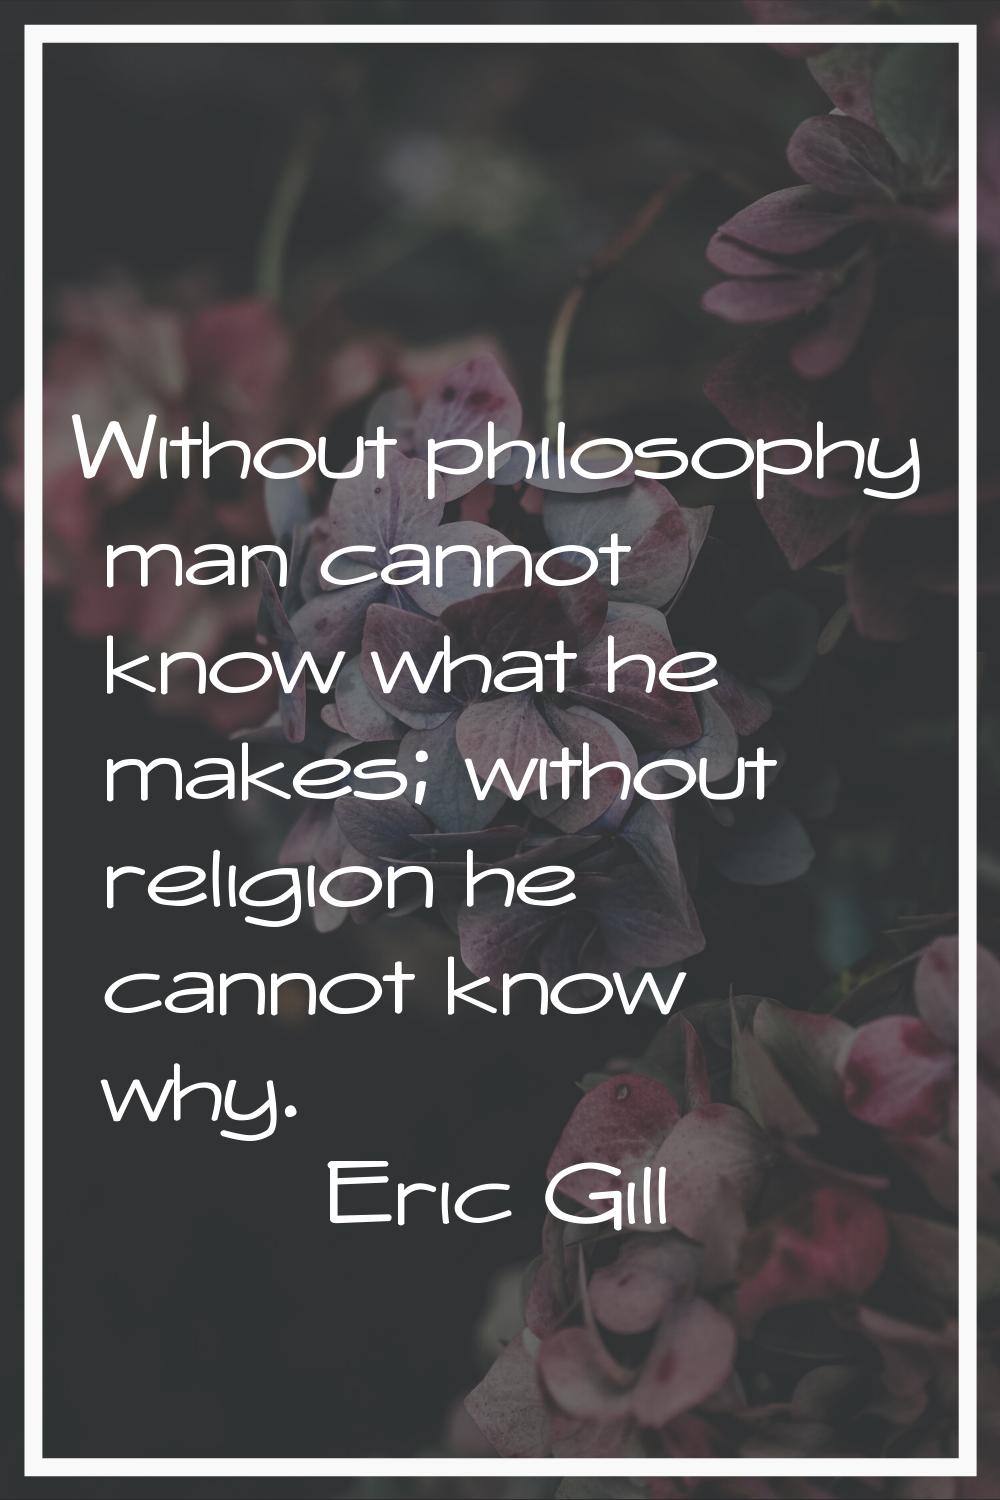 Without philosophy man cannot know what he makes; without religion he cannot know why.